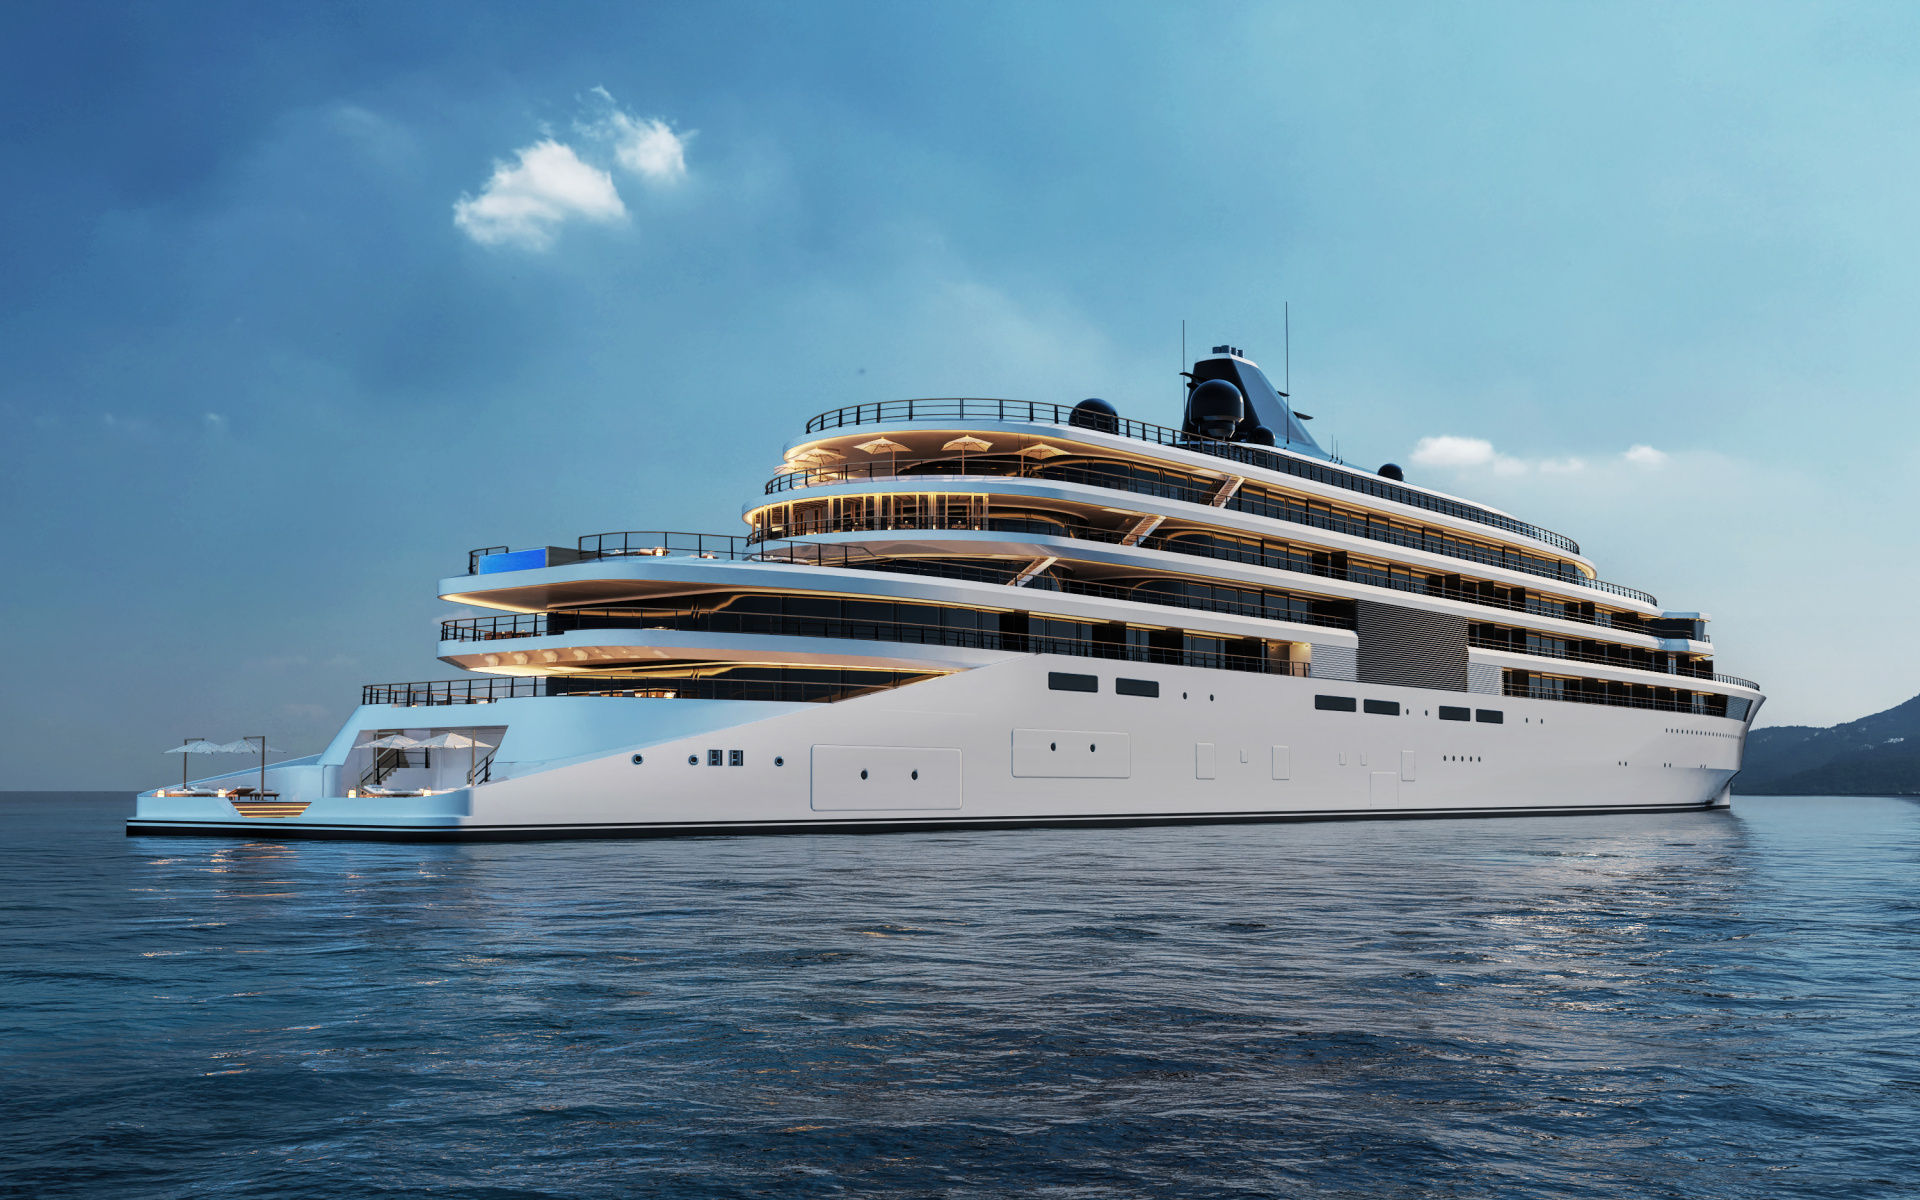 Aman is launching a new luxury cruiseliner 